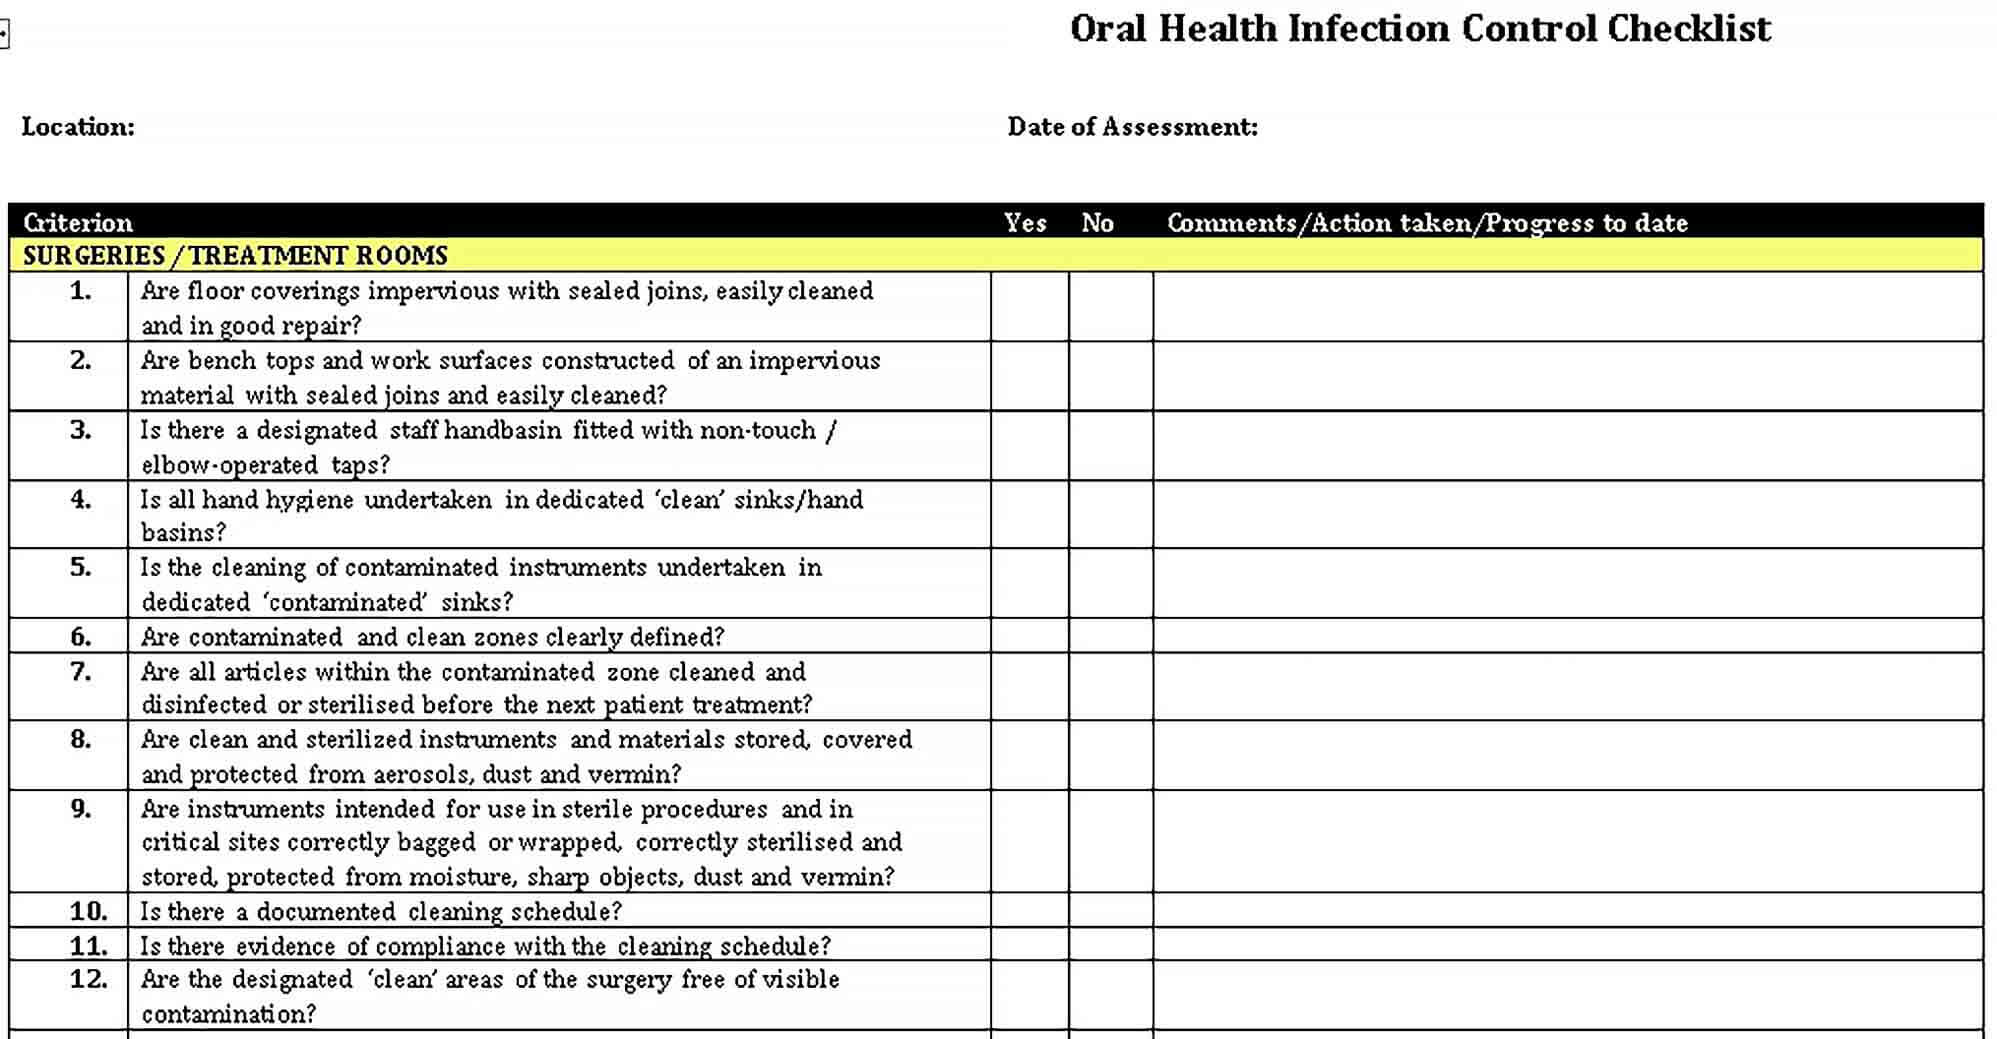 Sample Oral Health Infection Control Checklist Template